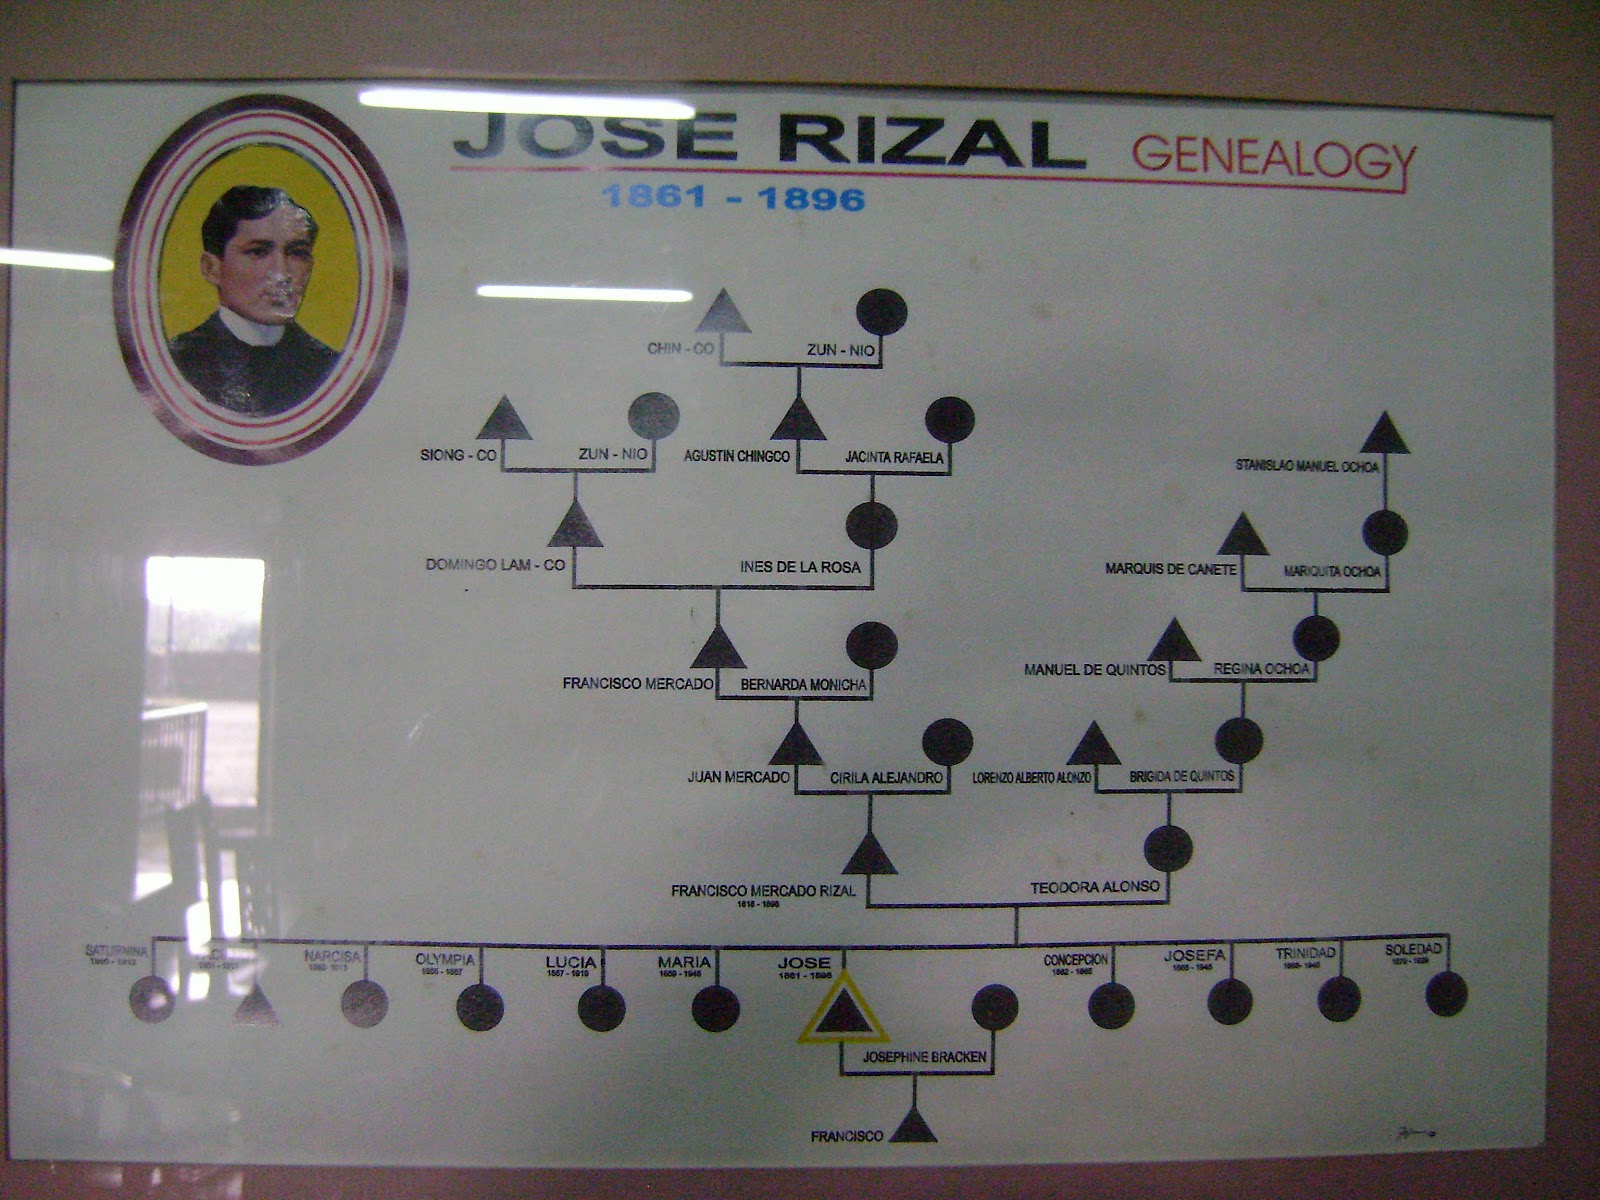 Infographic Of Rizal